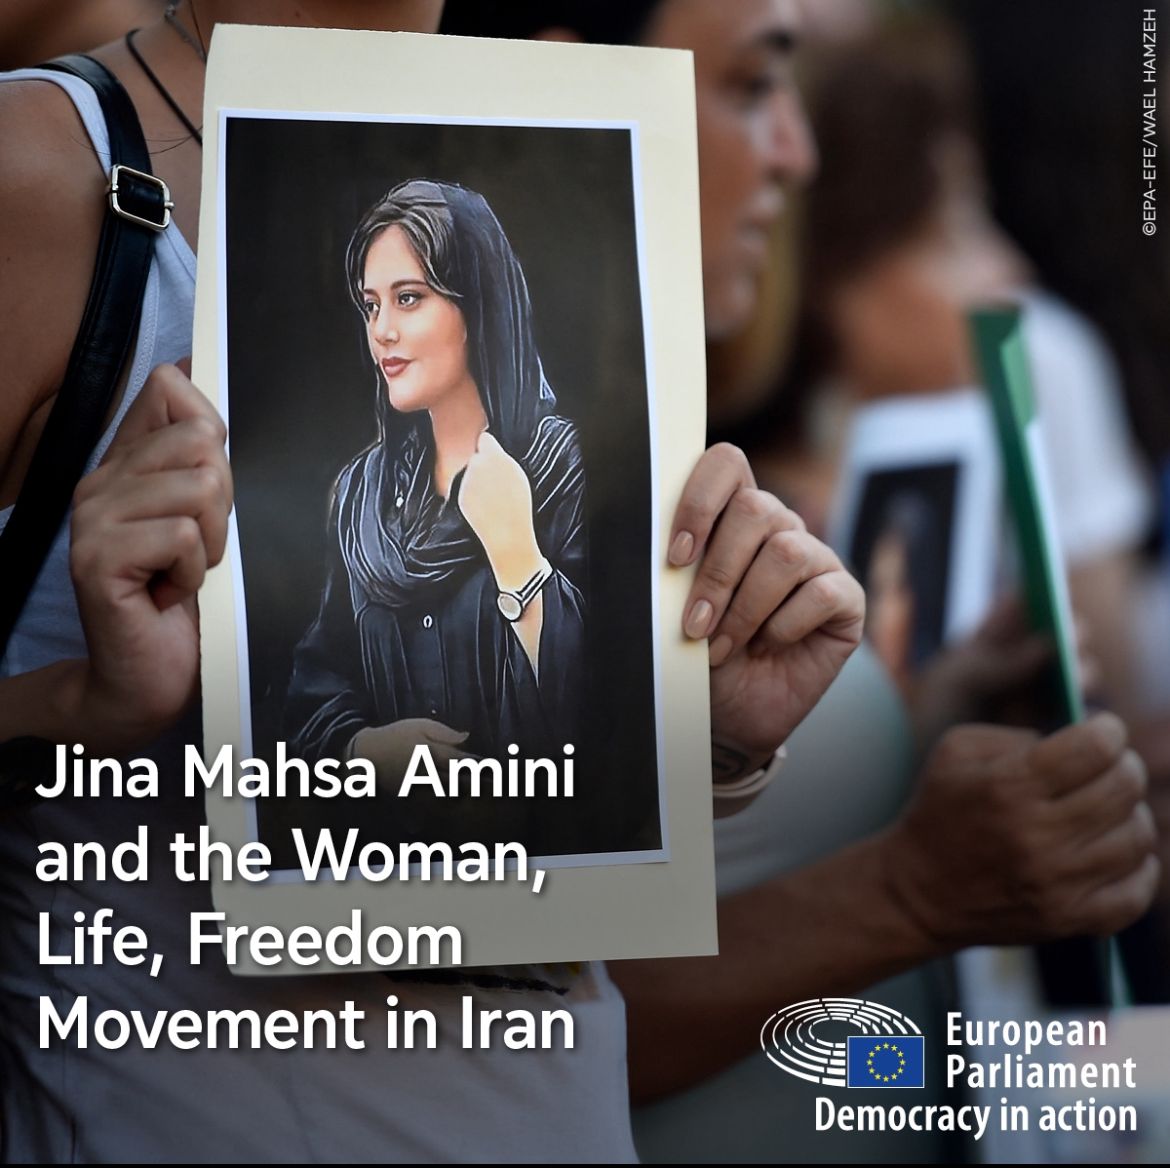 Women. Life. Freedom. Proud to announce that the winners of the 2023 Sakharov Prize are #MahsaAmini & #WomenLifeFreedom Movement in Iran. These brave women, men & young people have inspired the world through their fight for equality, liberty & dignity. زن زندگی آزادی